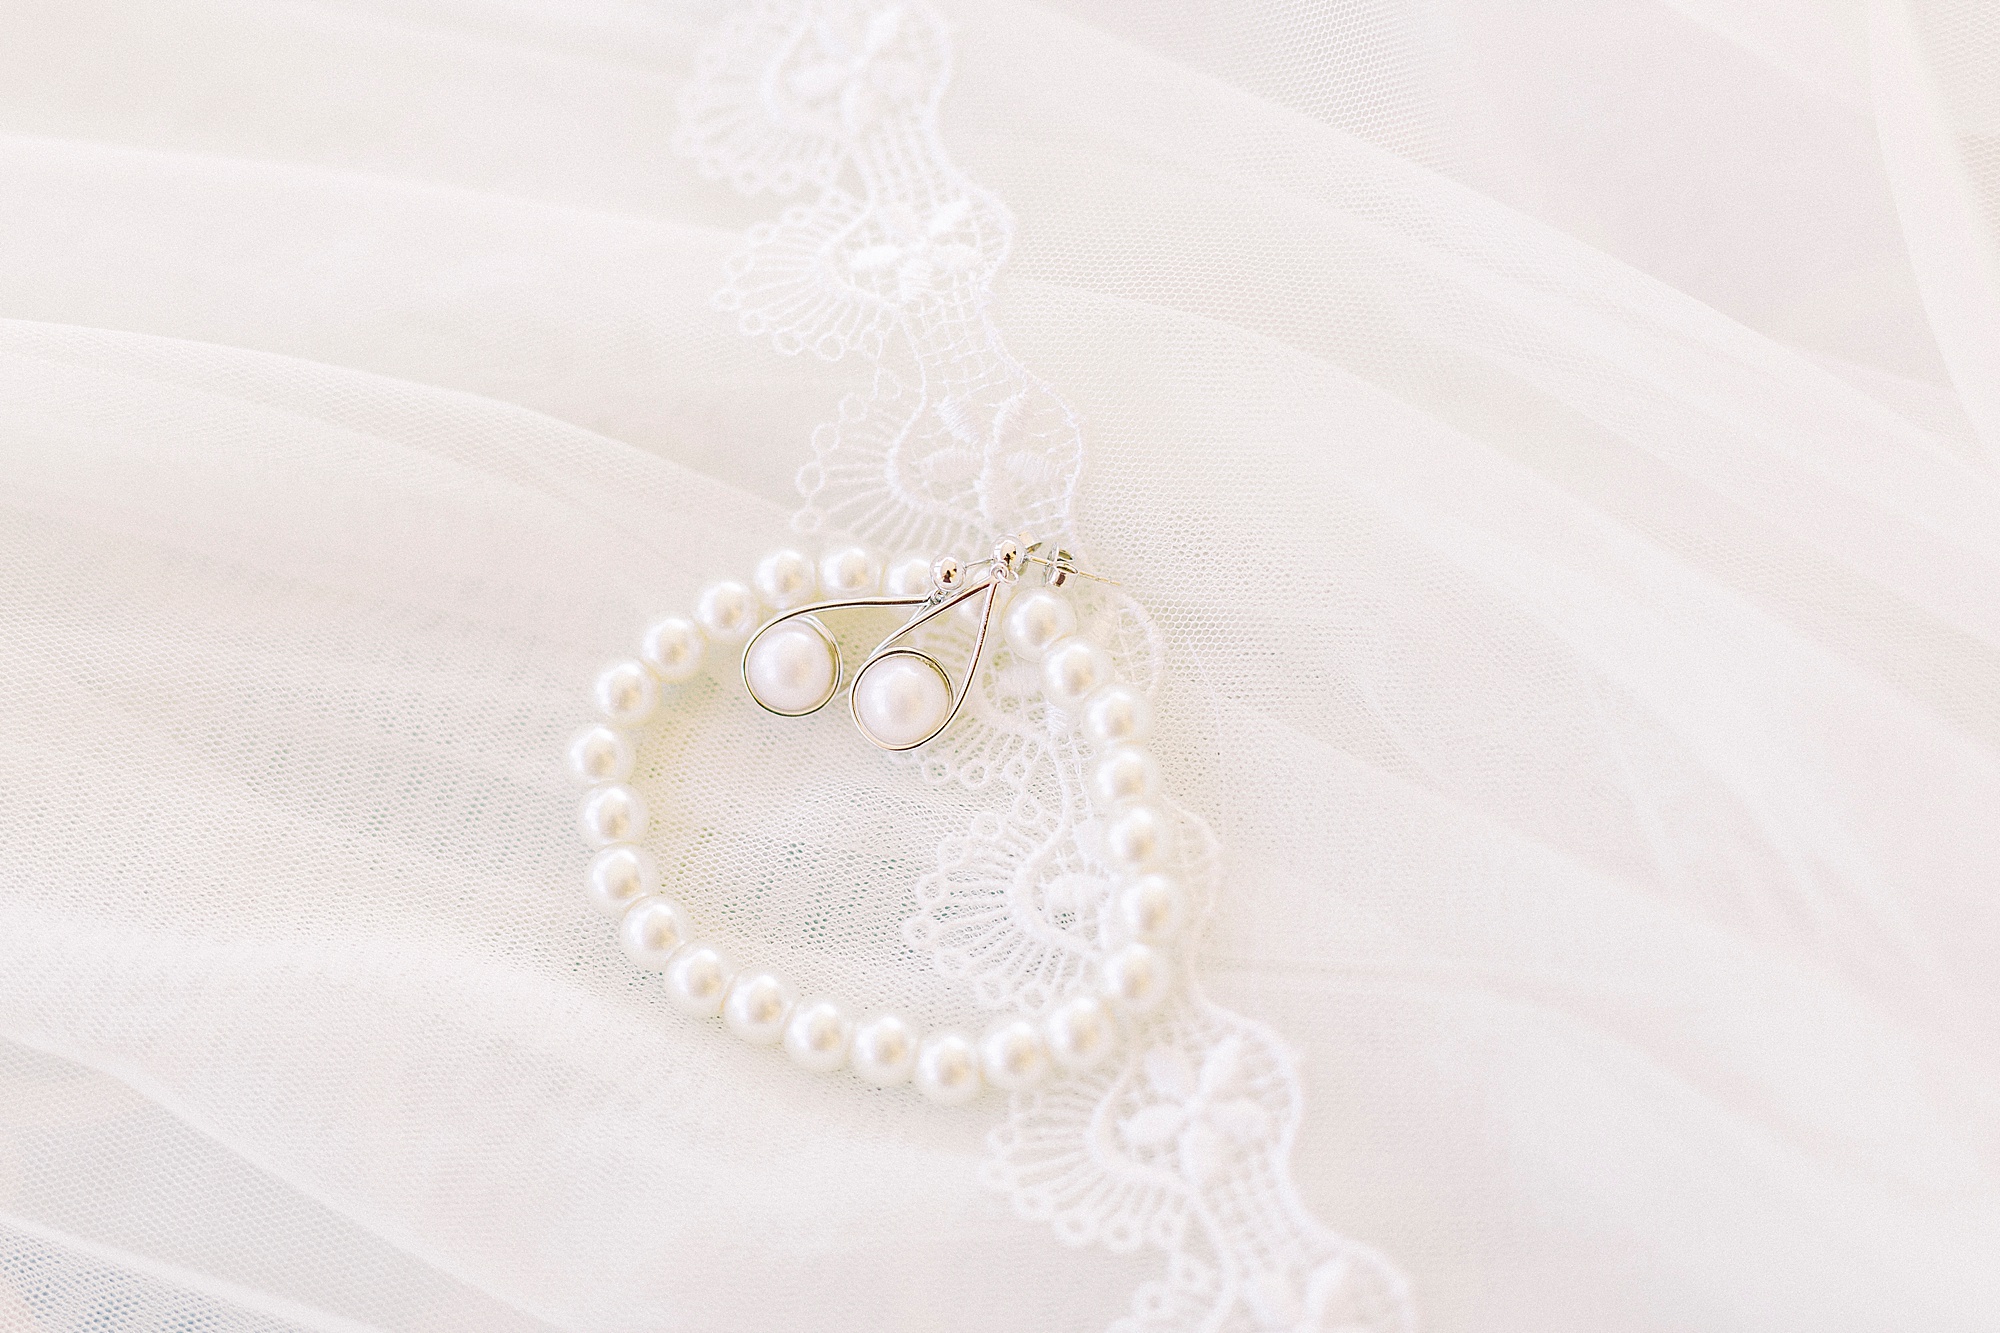 bride's pearl bracelet and earrings for NC wedding day